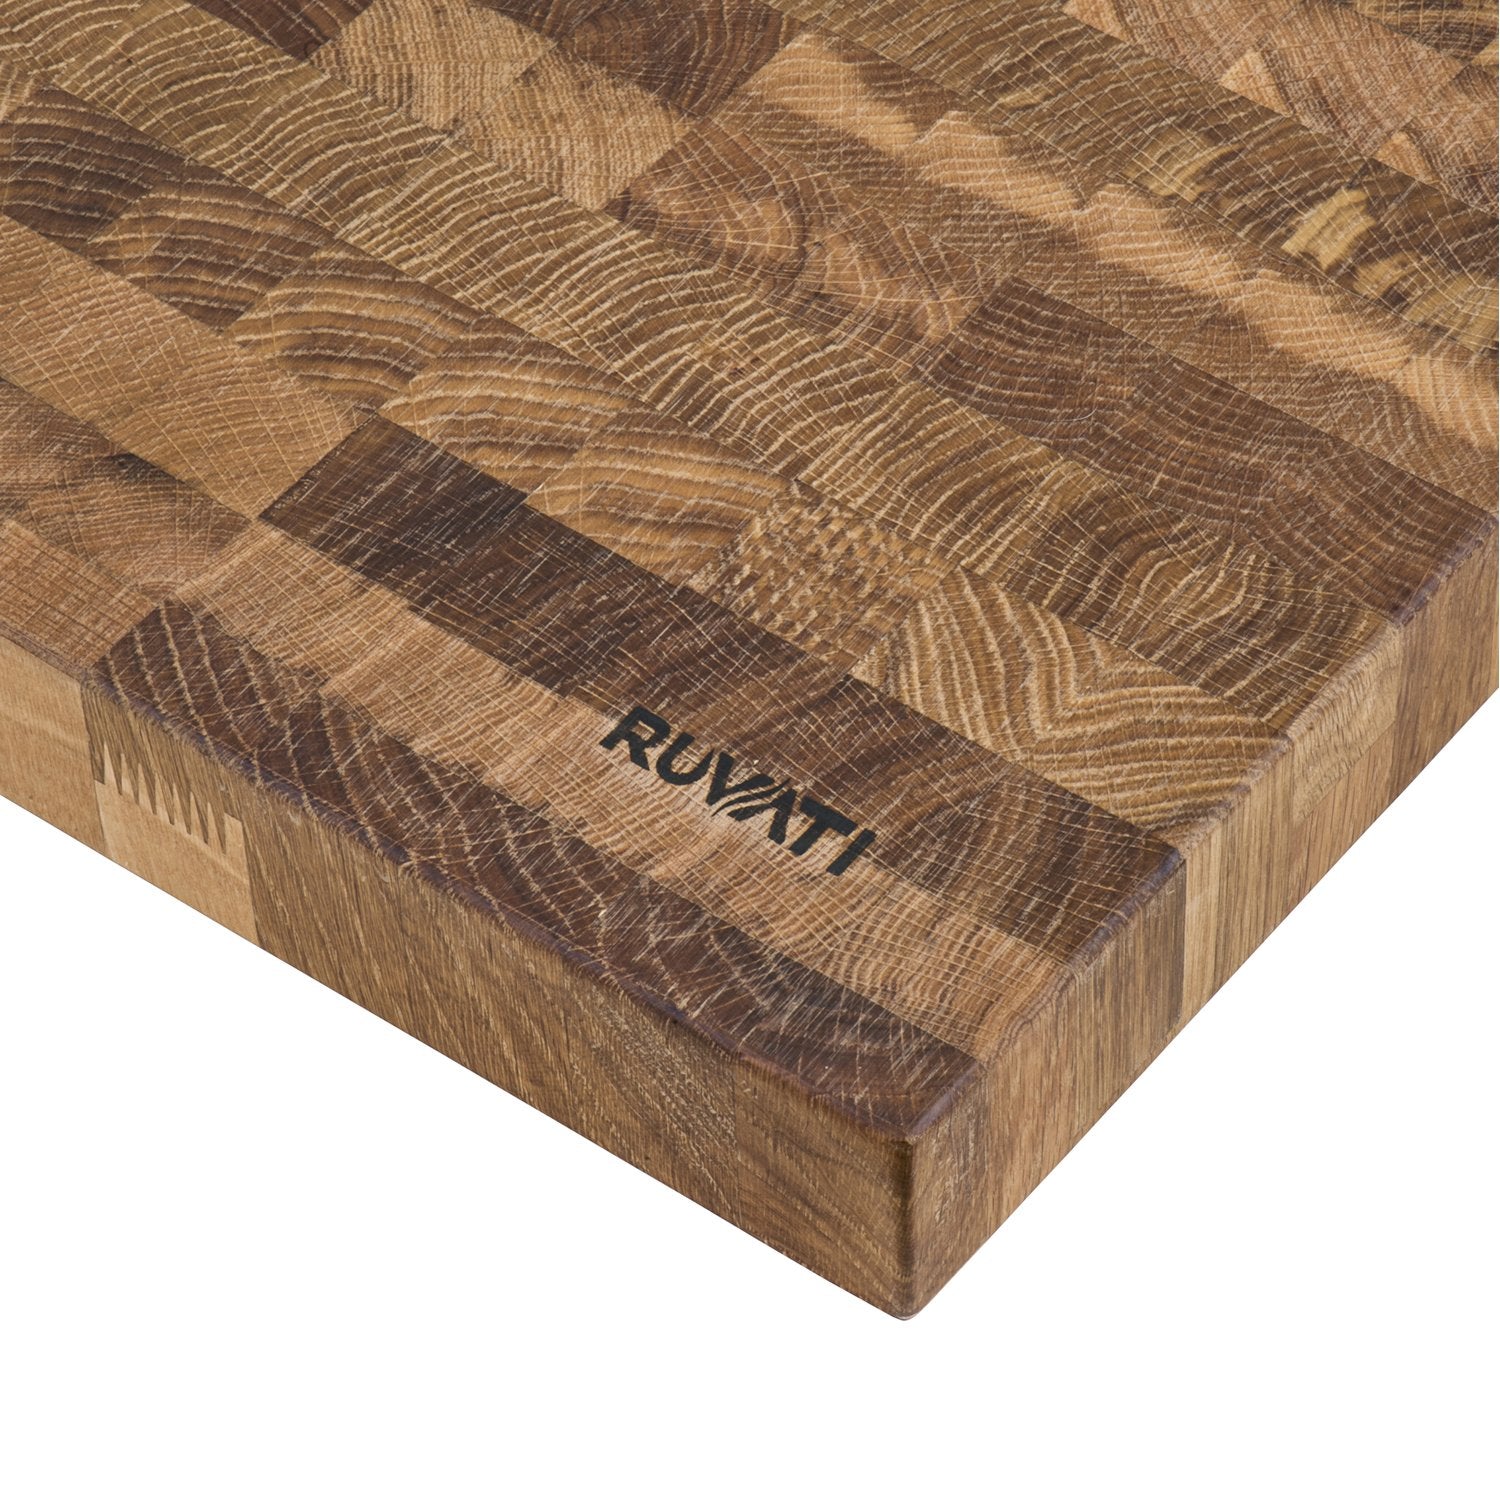 17 x 16 x 2 inch thick End Grain French Oak Butcher Block Solid Wood Large  Cutting Board